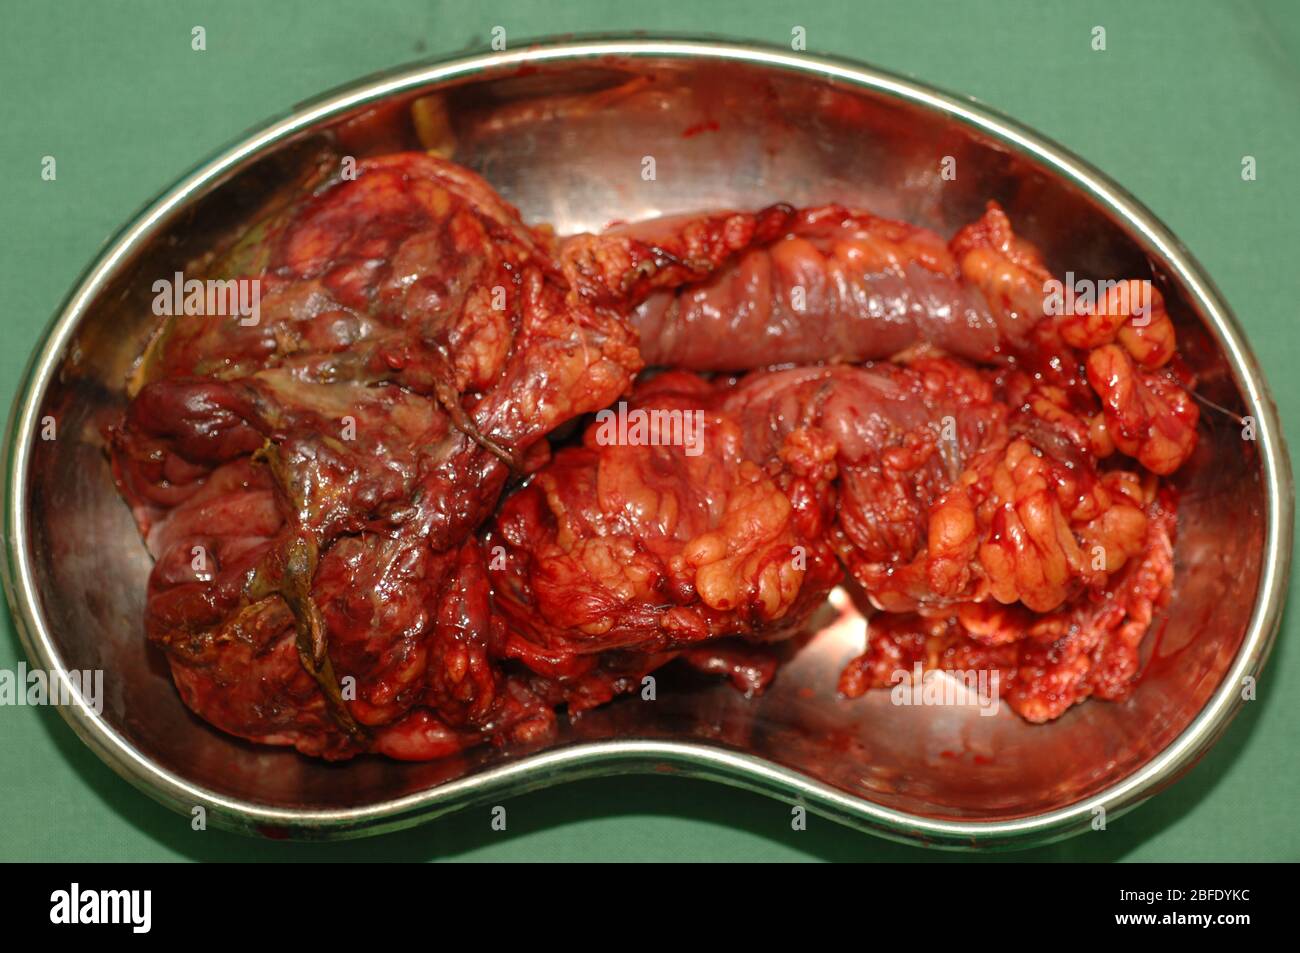 Surgeons work to remove the caecum and ascending colon of a patient following a gunshot wound. Stock Photo